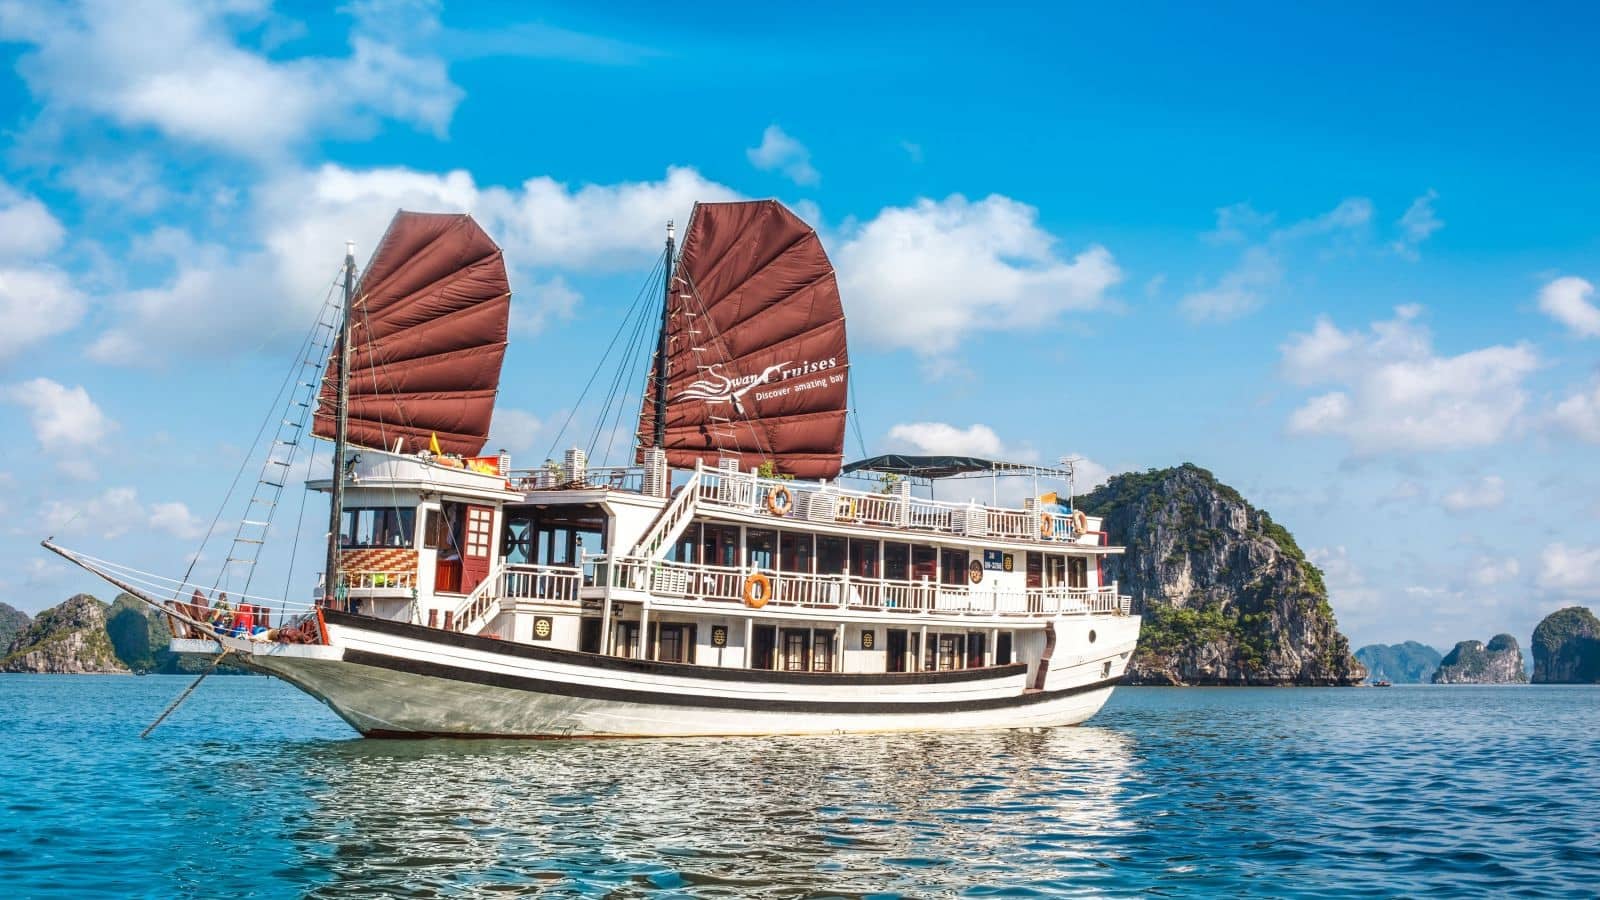 A cruise in Halong Bay is a must-do activity